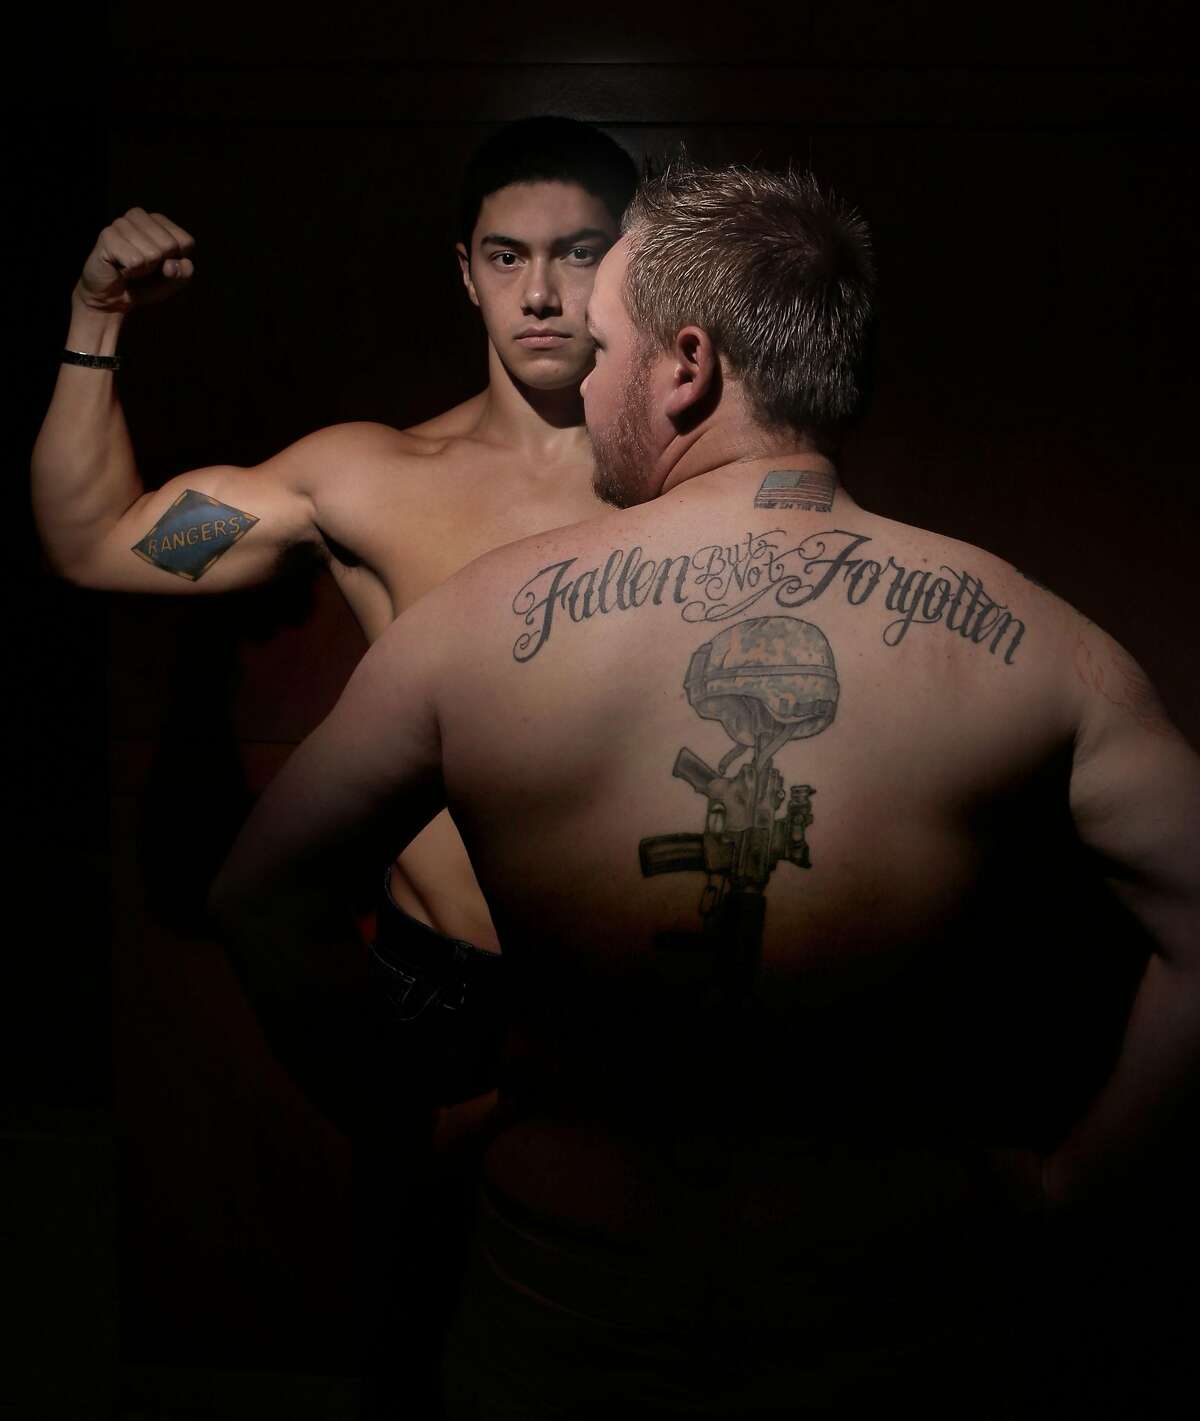 William Glazier, (left) of Gilroy, who served with the 1st Ranger Battalion of the US Army and Jonathan Snyder, of Des Moine, Iowa, who served with the US Army 4th Engineer Battalion display their tattoos, as seen on Friday Nov. 7, 2014 in Oakland, Calif. Veterans of the Iraq and Afghanistan wars come together to display their tattoos for an exhibition called War Ink.